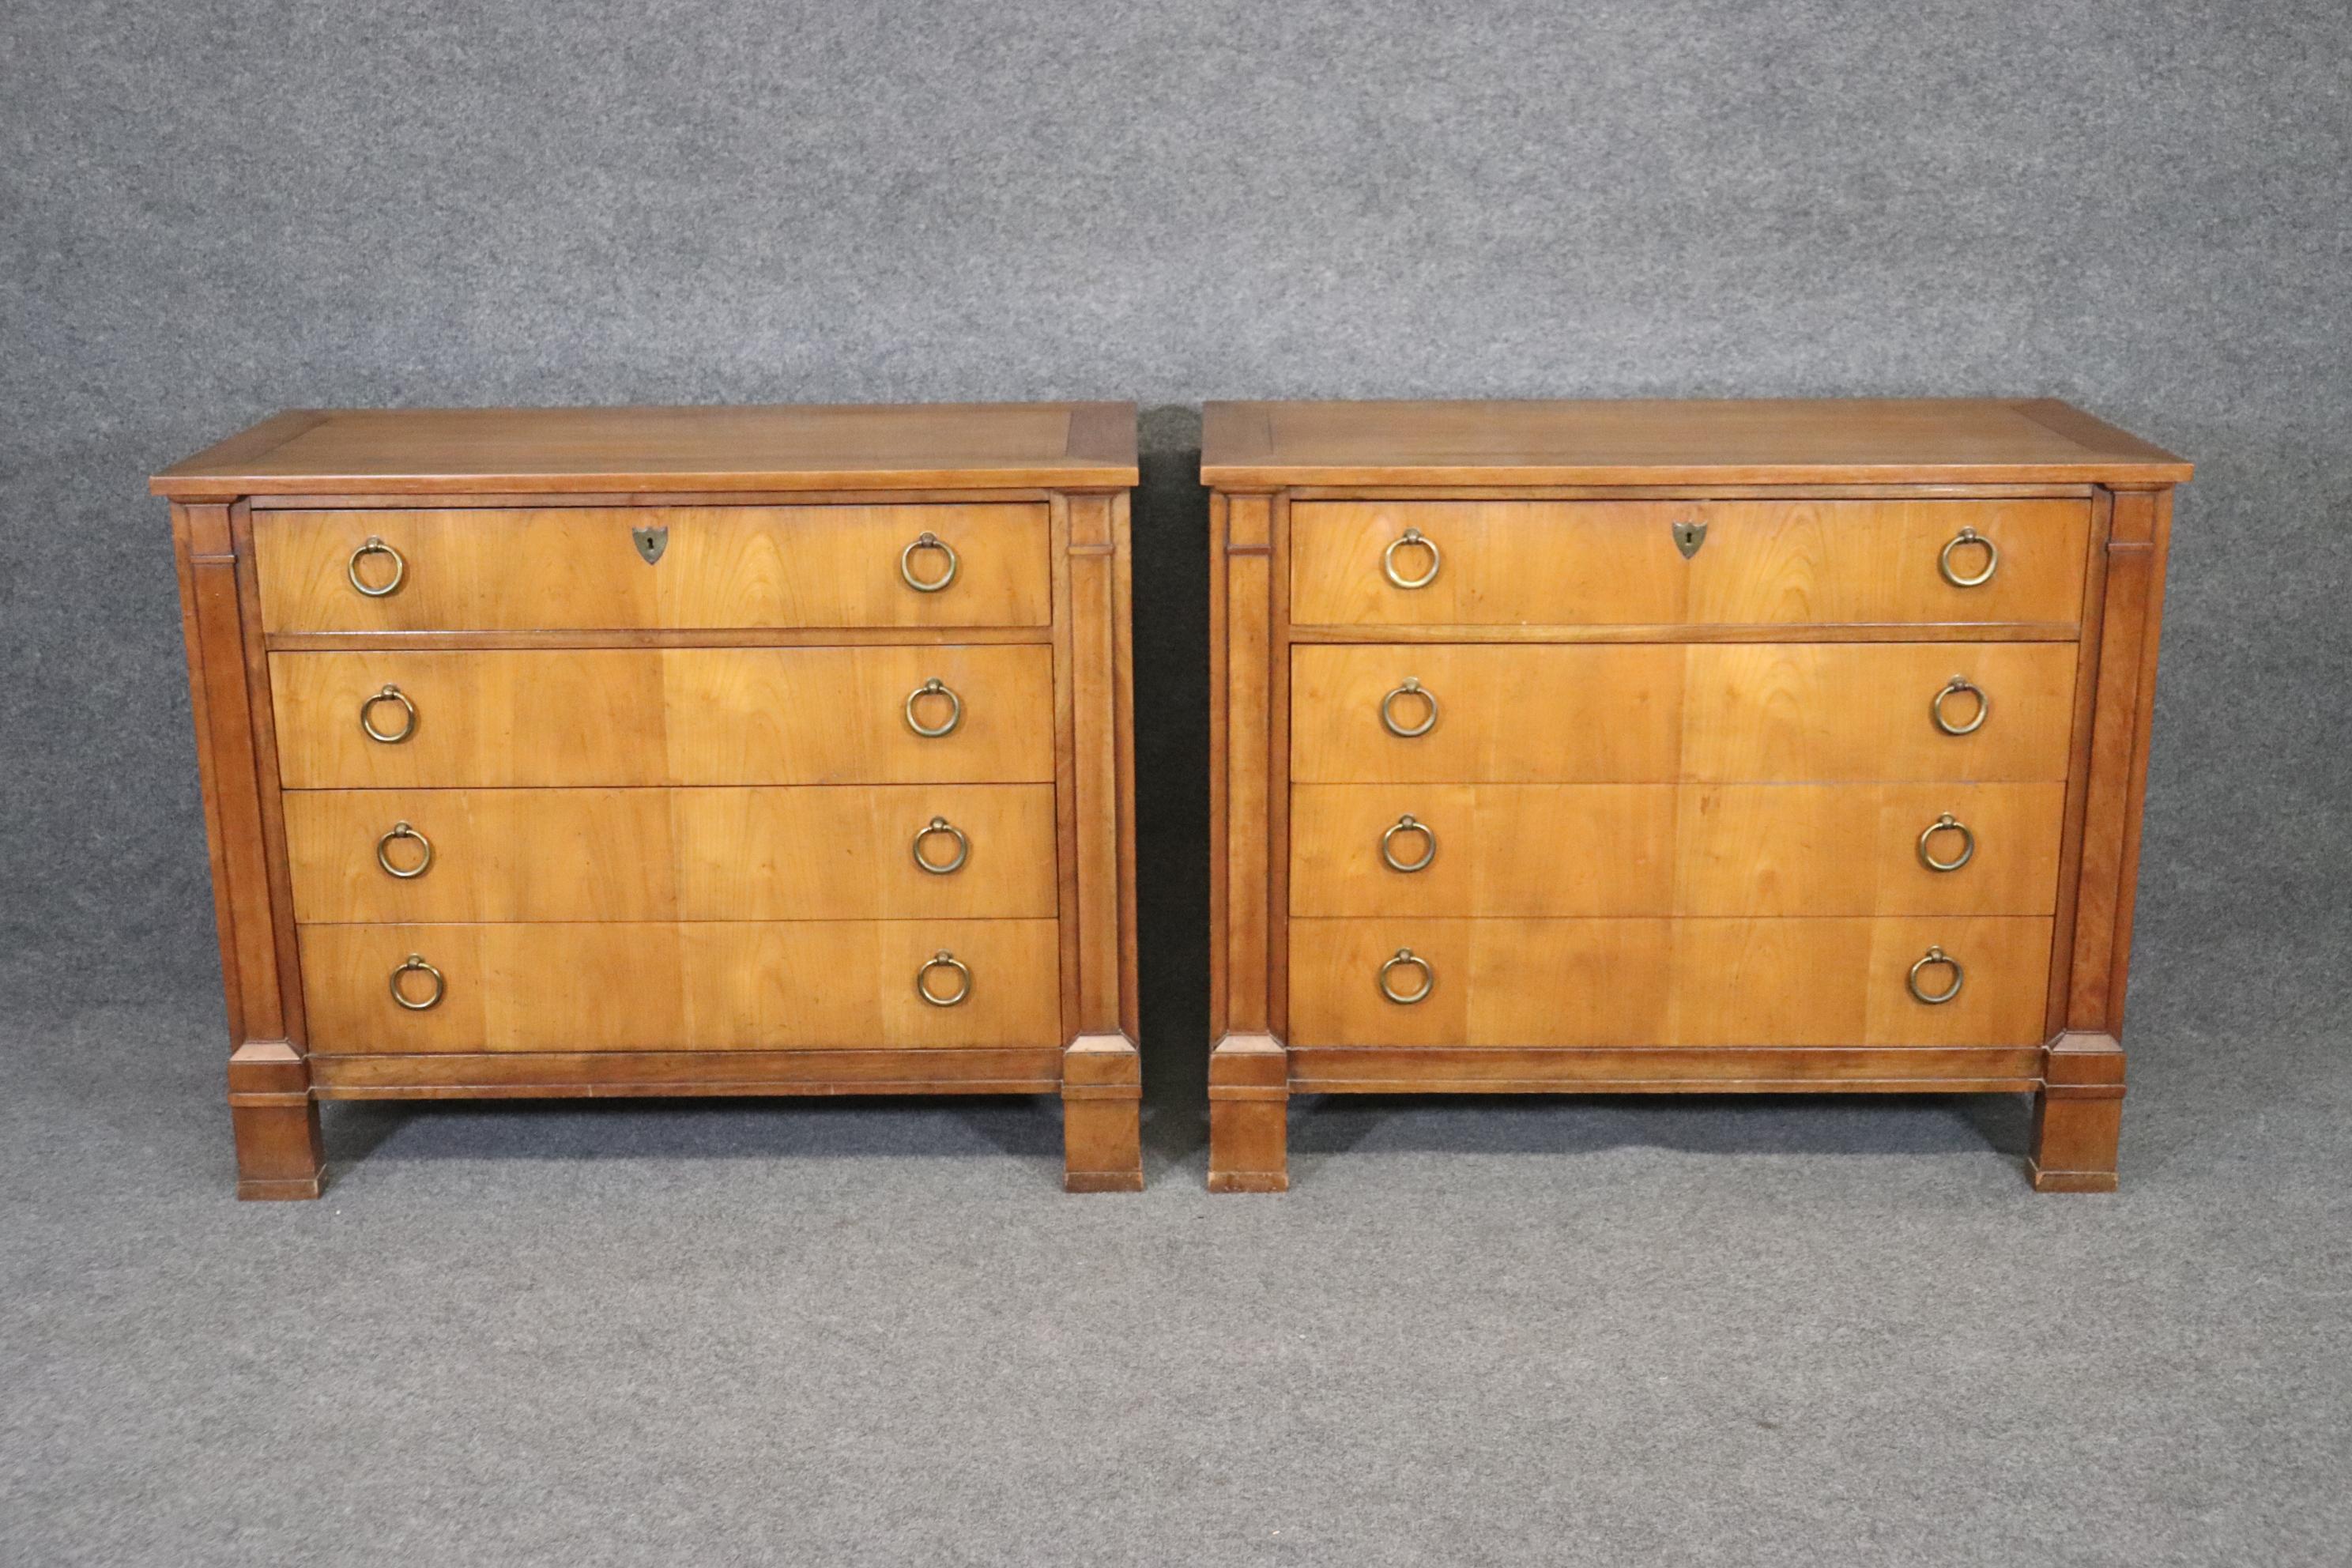 This is a fantastic pair of Baker Directoire style bachelors chests or commodes. They are in good vintage 1950s condition and have simple and yet very sophistcated classic stying that really adds a touch of class to any environment or design scheme.